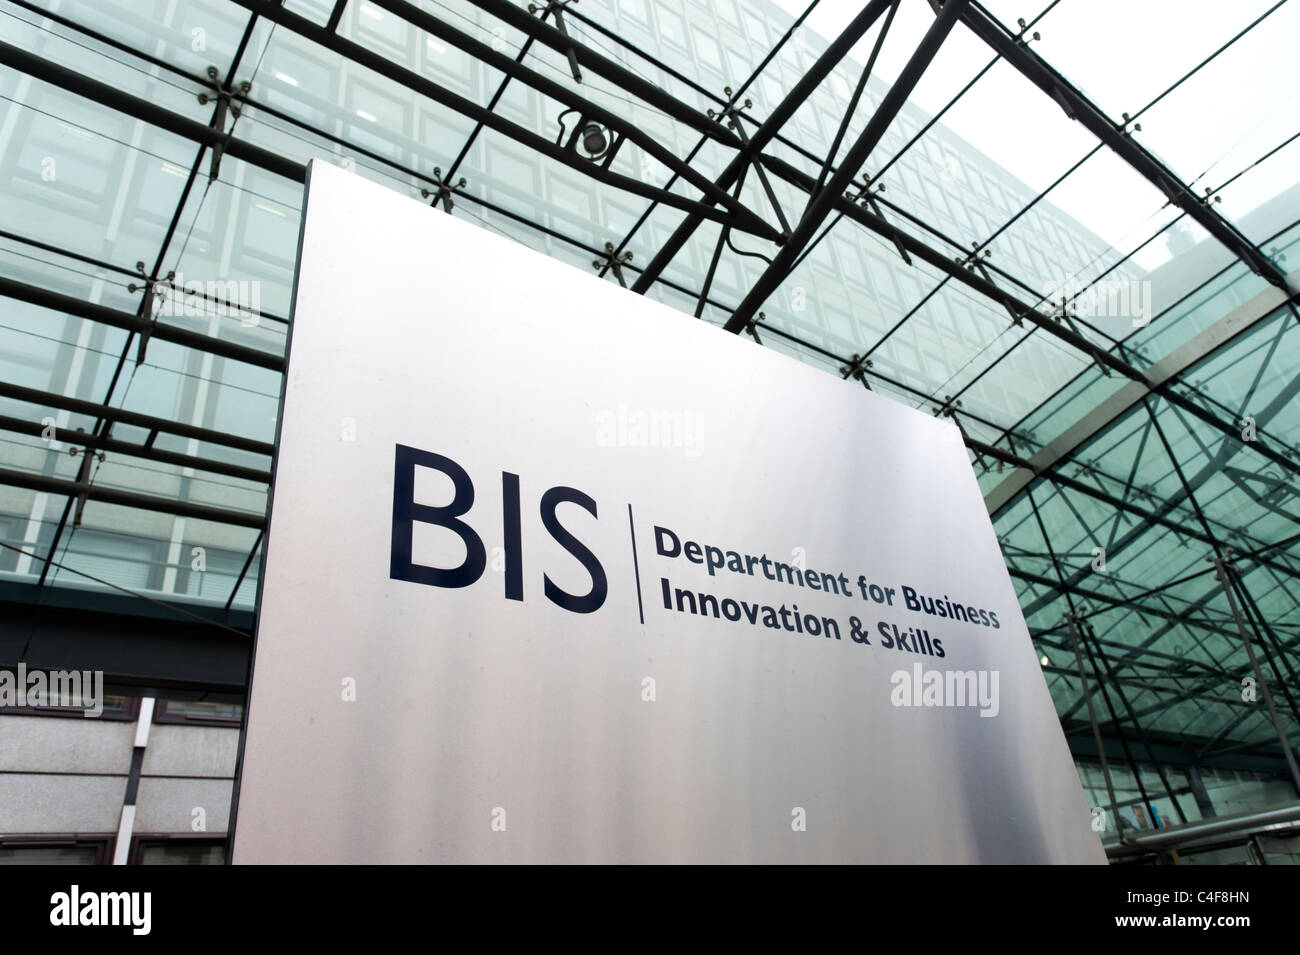 Department for Business Innovation and skills, London, UK Banque D'Images